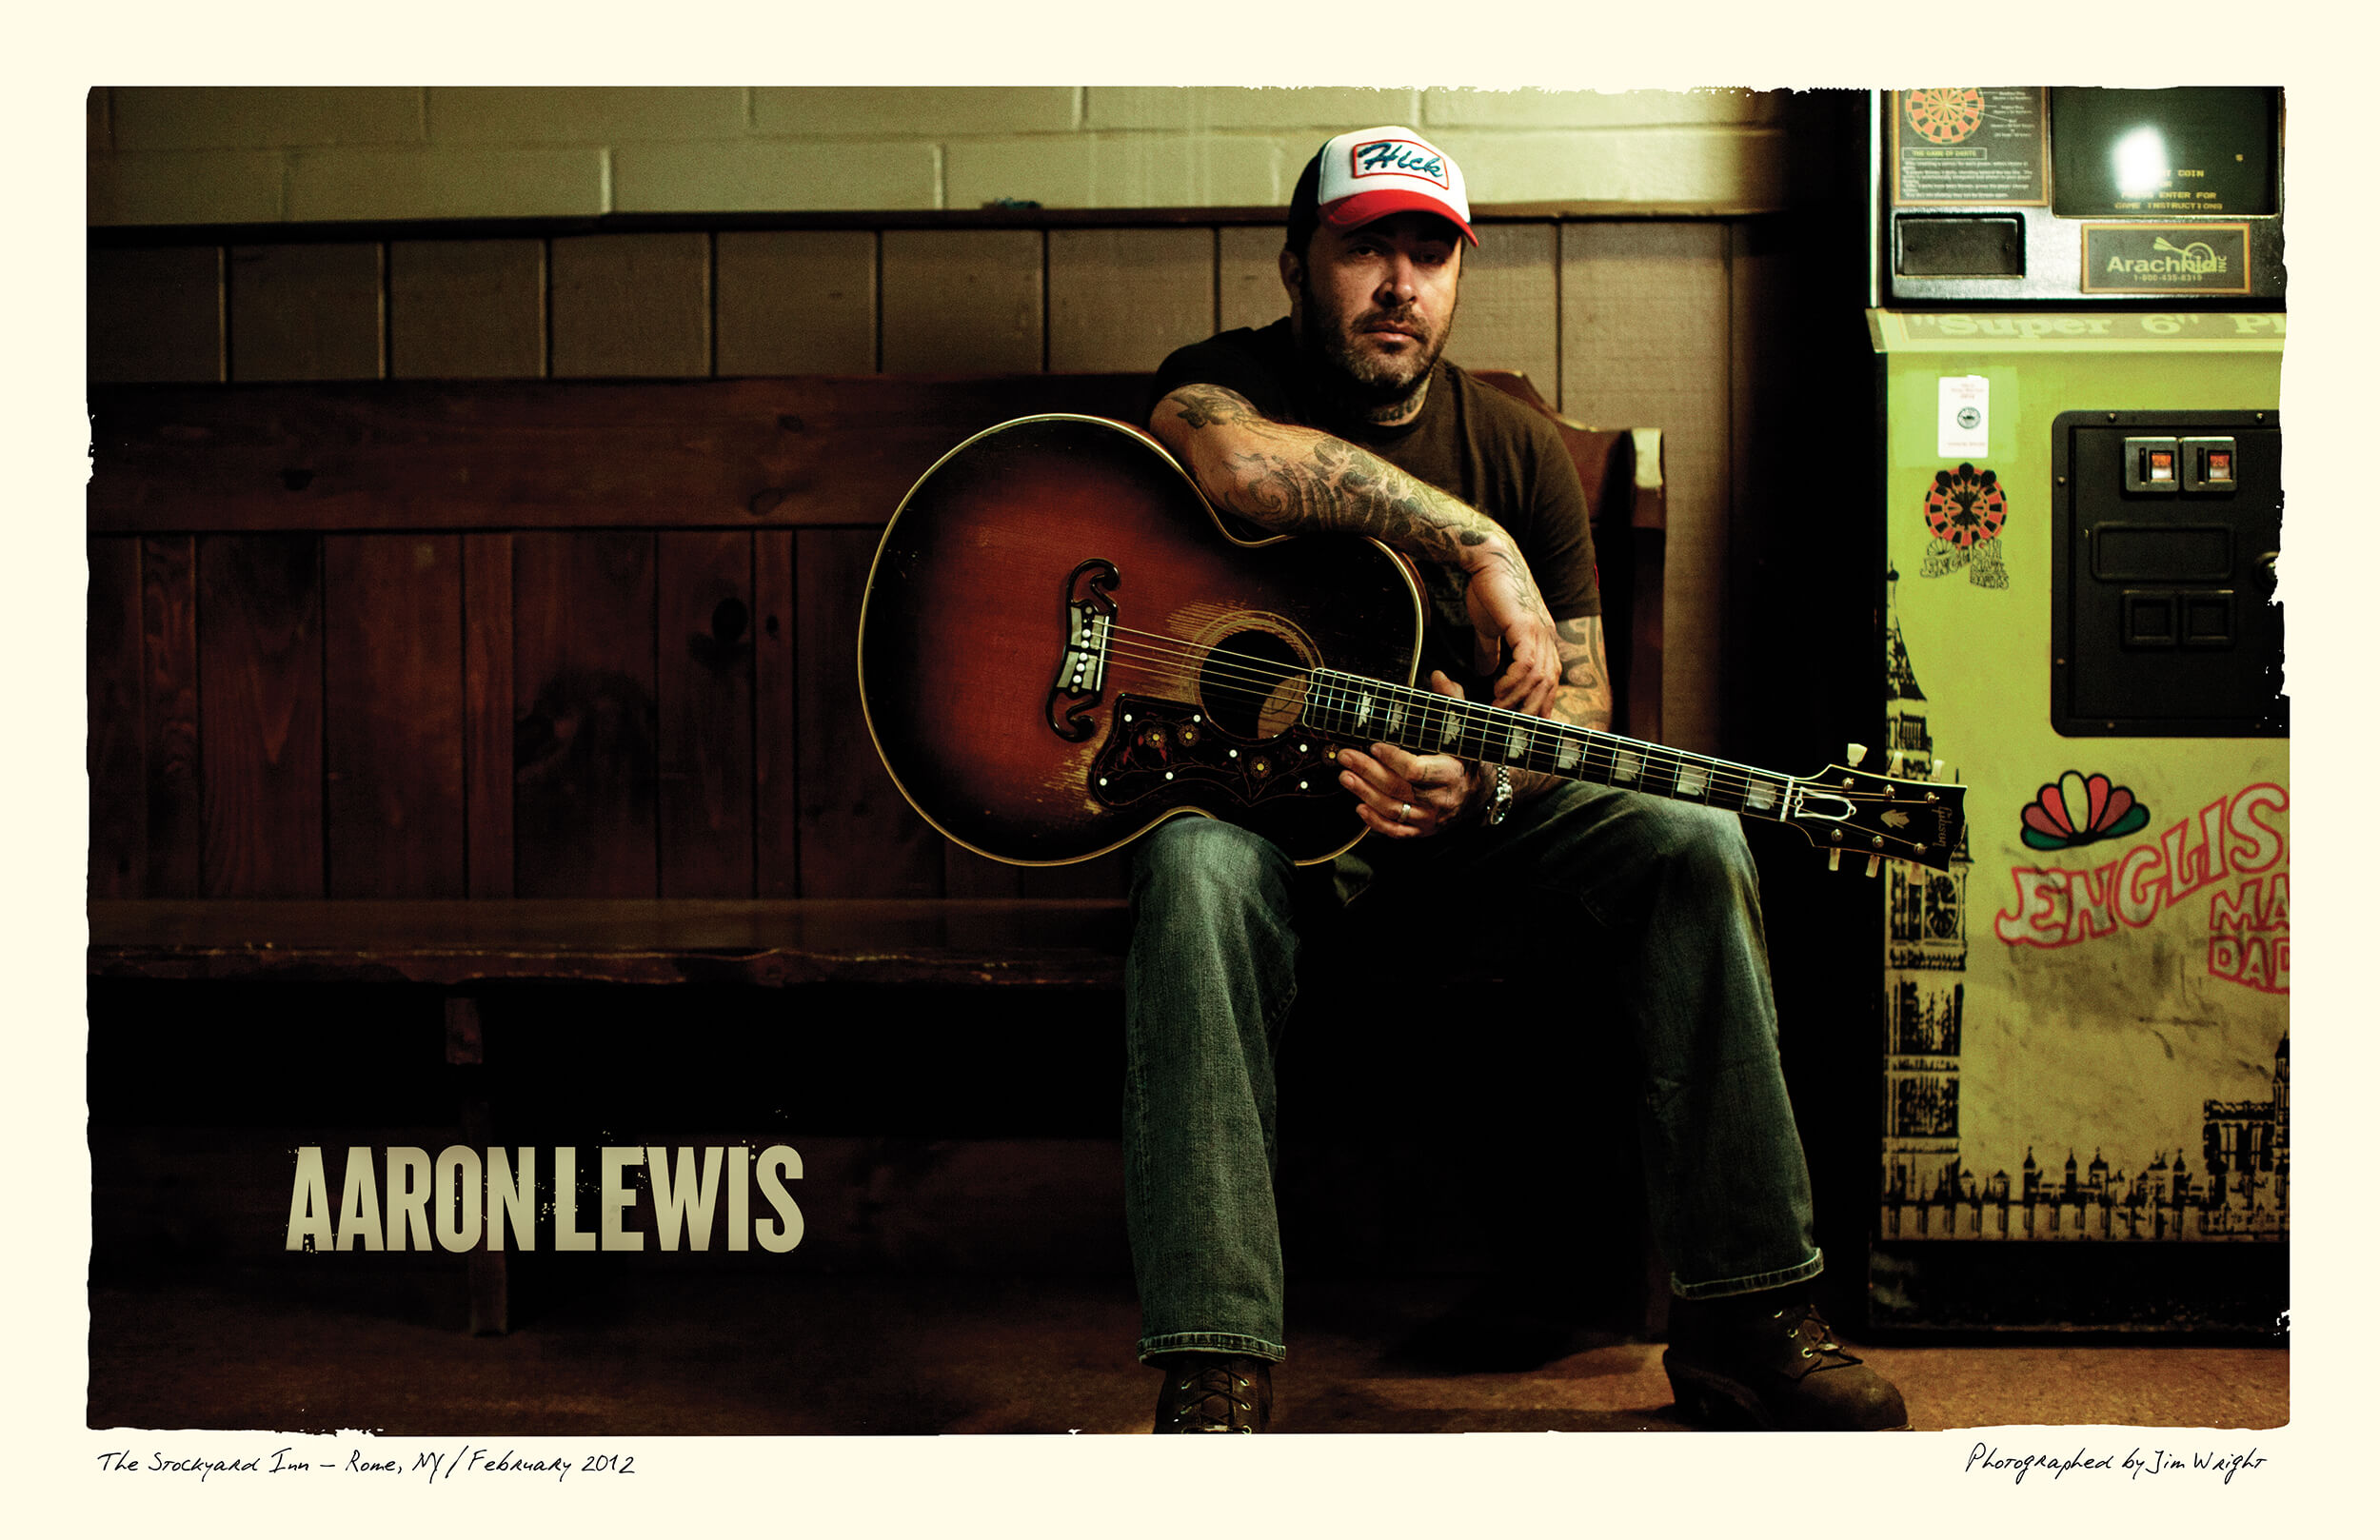 Lithographic print design in aesthetic alignment with The Road for Aaron Lewis